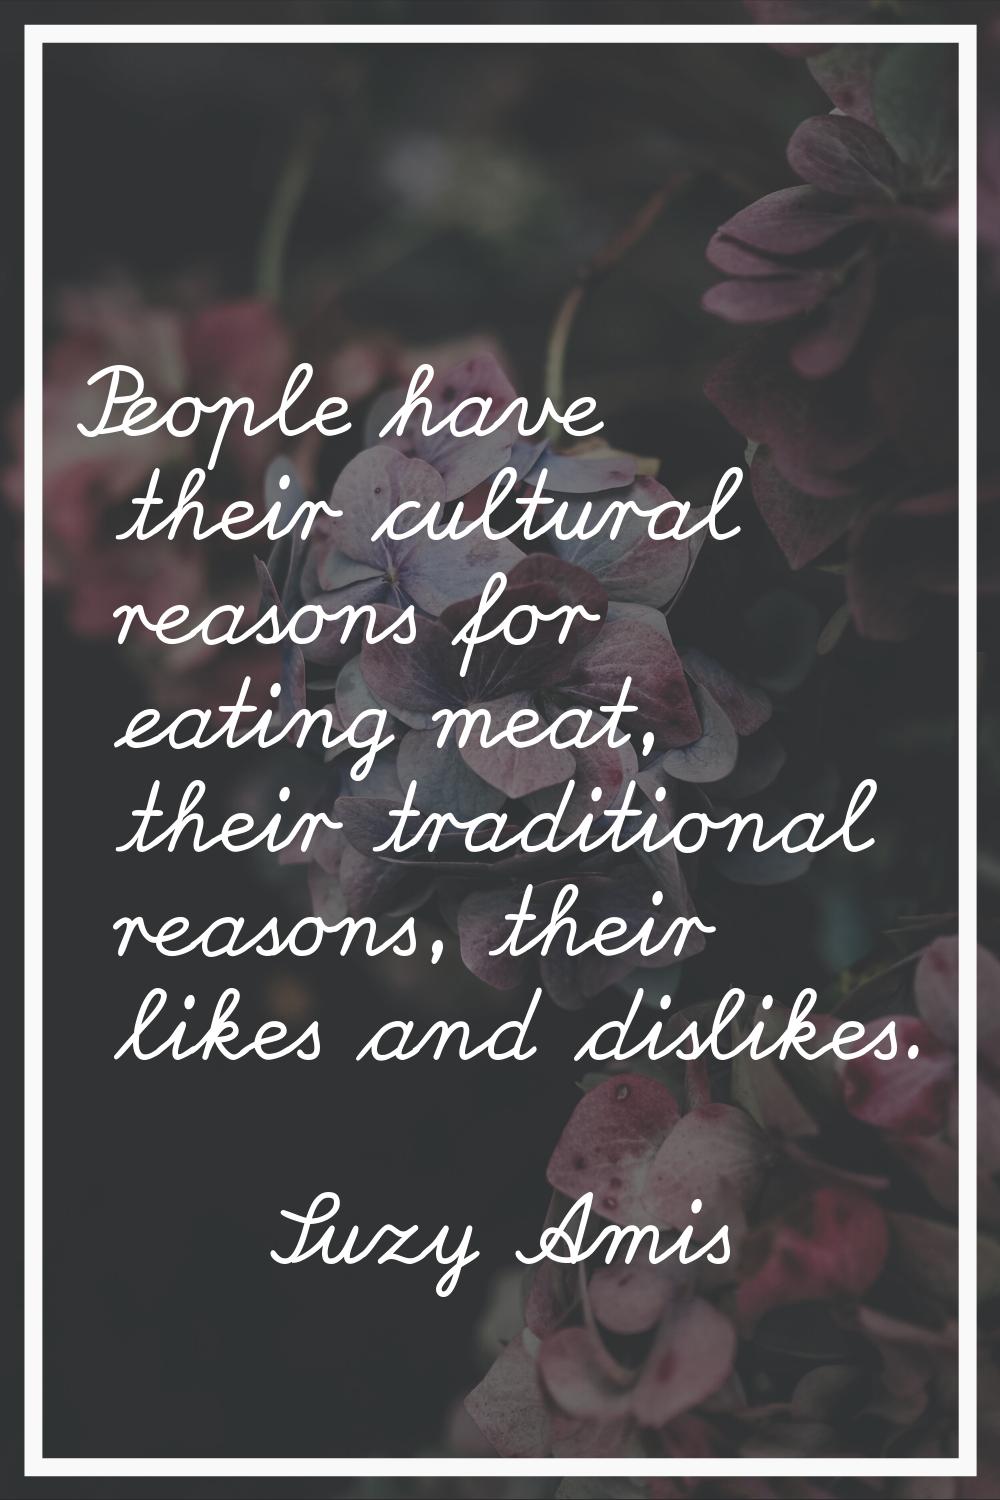 People have their cultural reasons for eating meat, their traditional reasons, their likes and disl